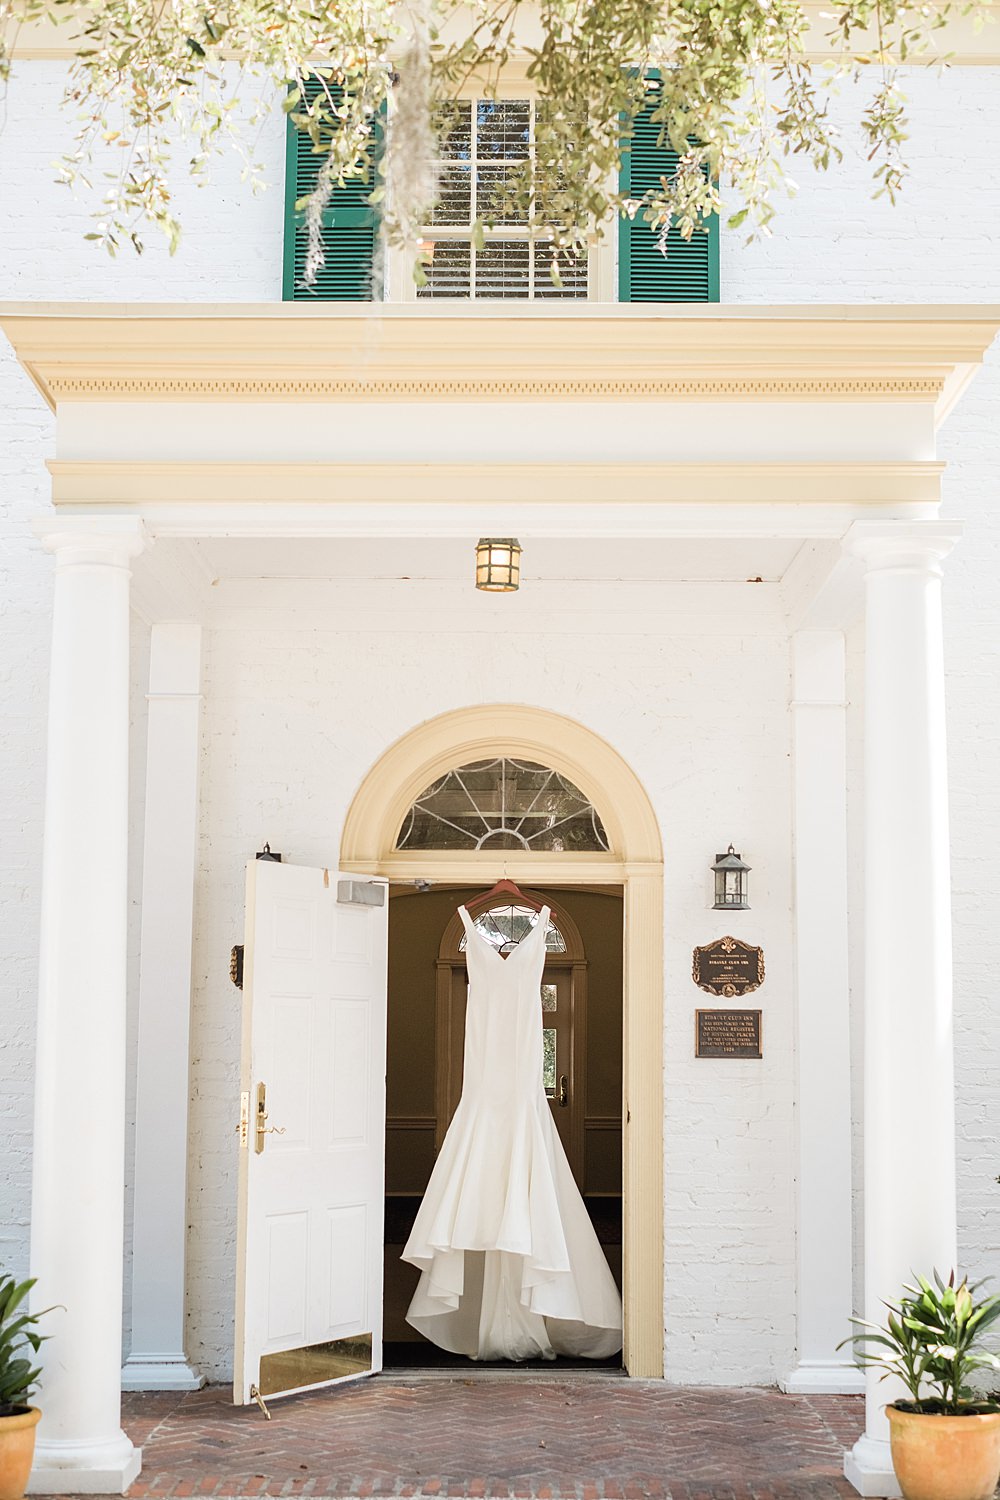 White satin dress hangs in the doorway of the historic Ribault Club